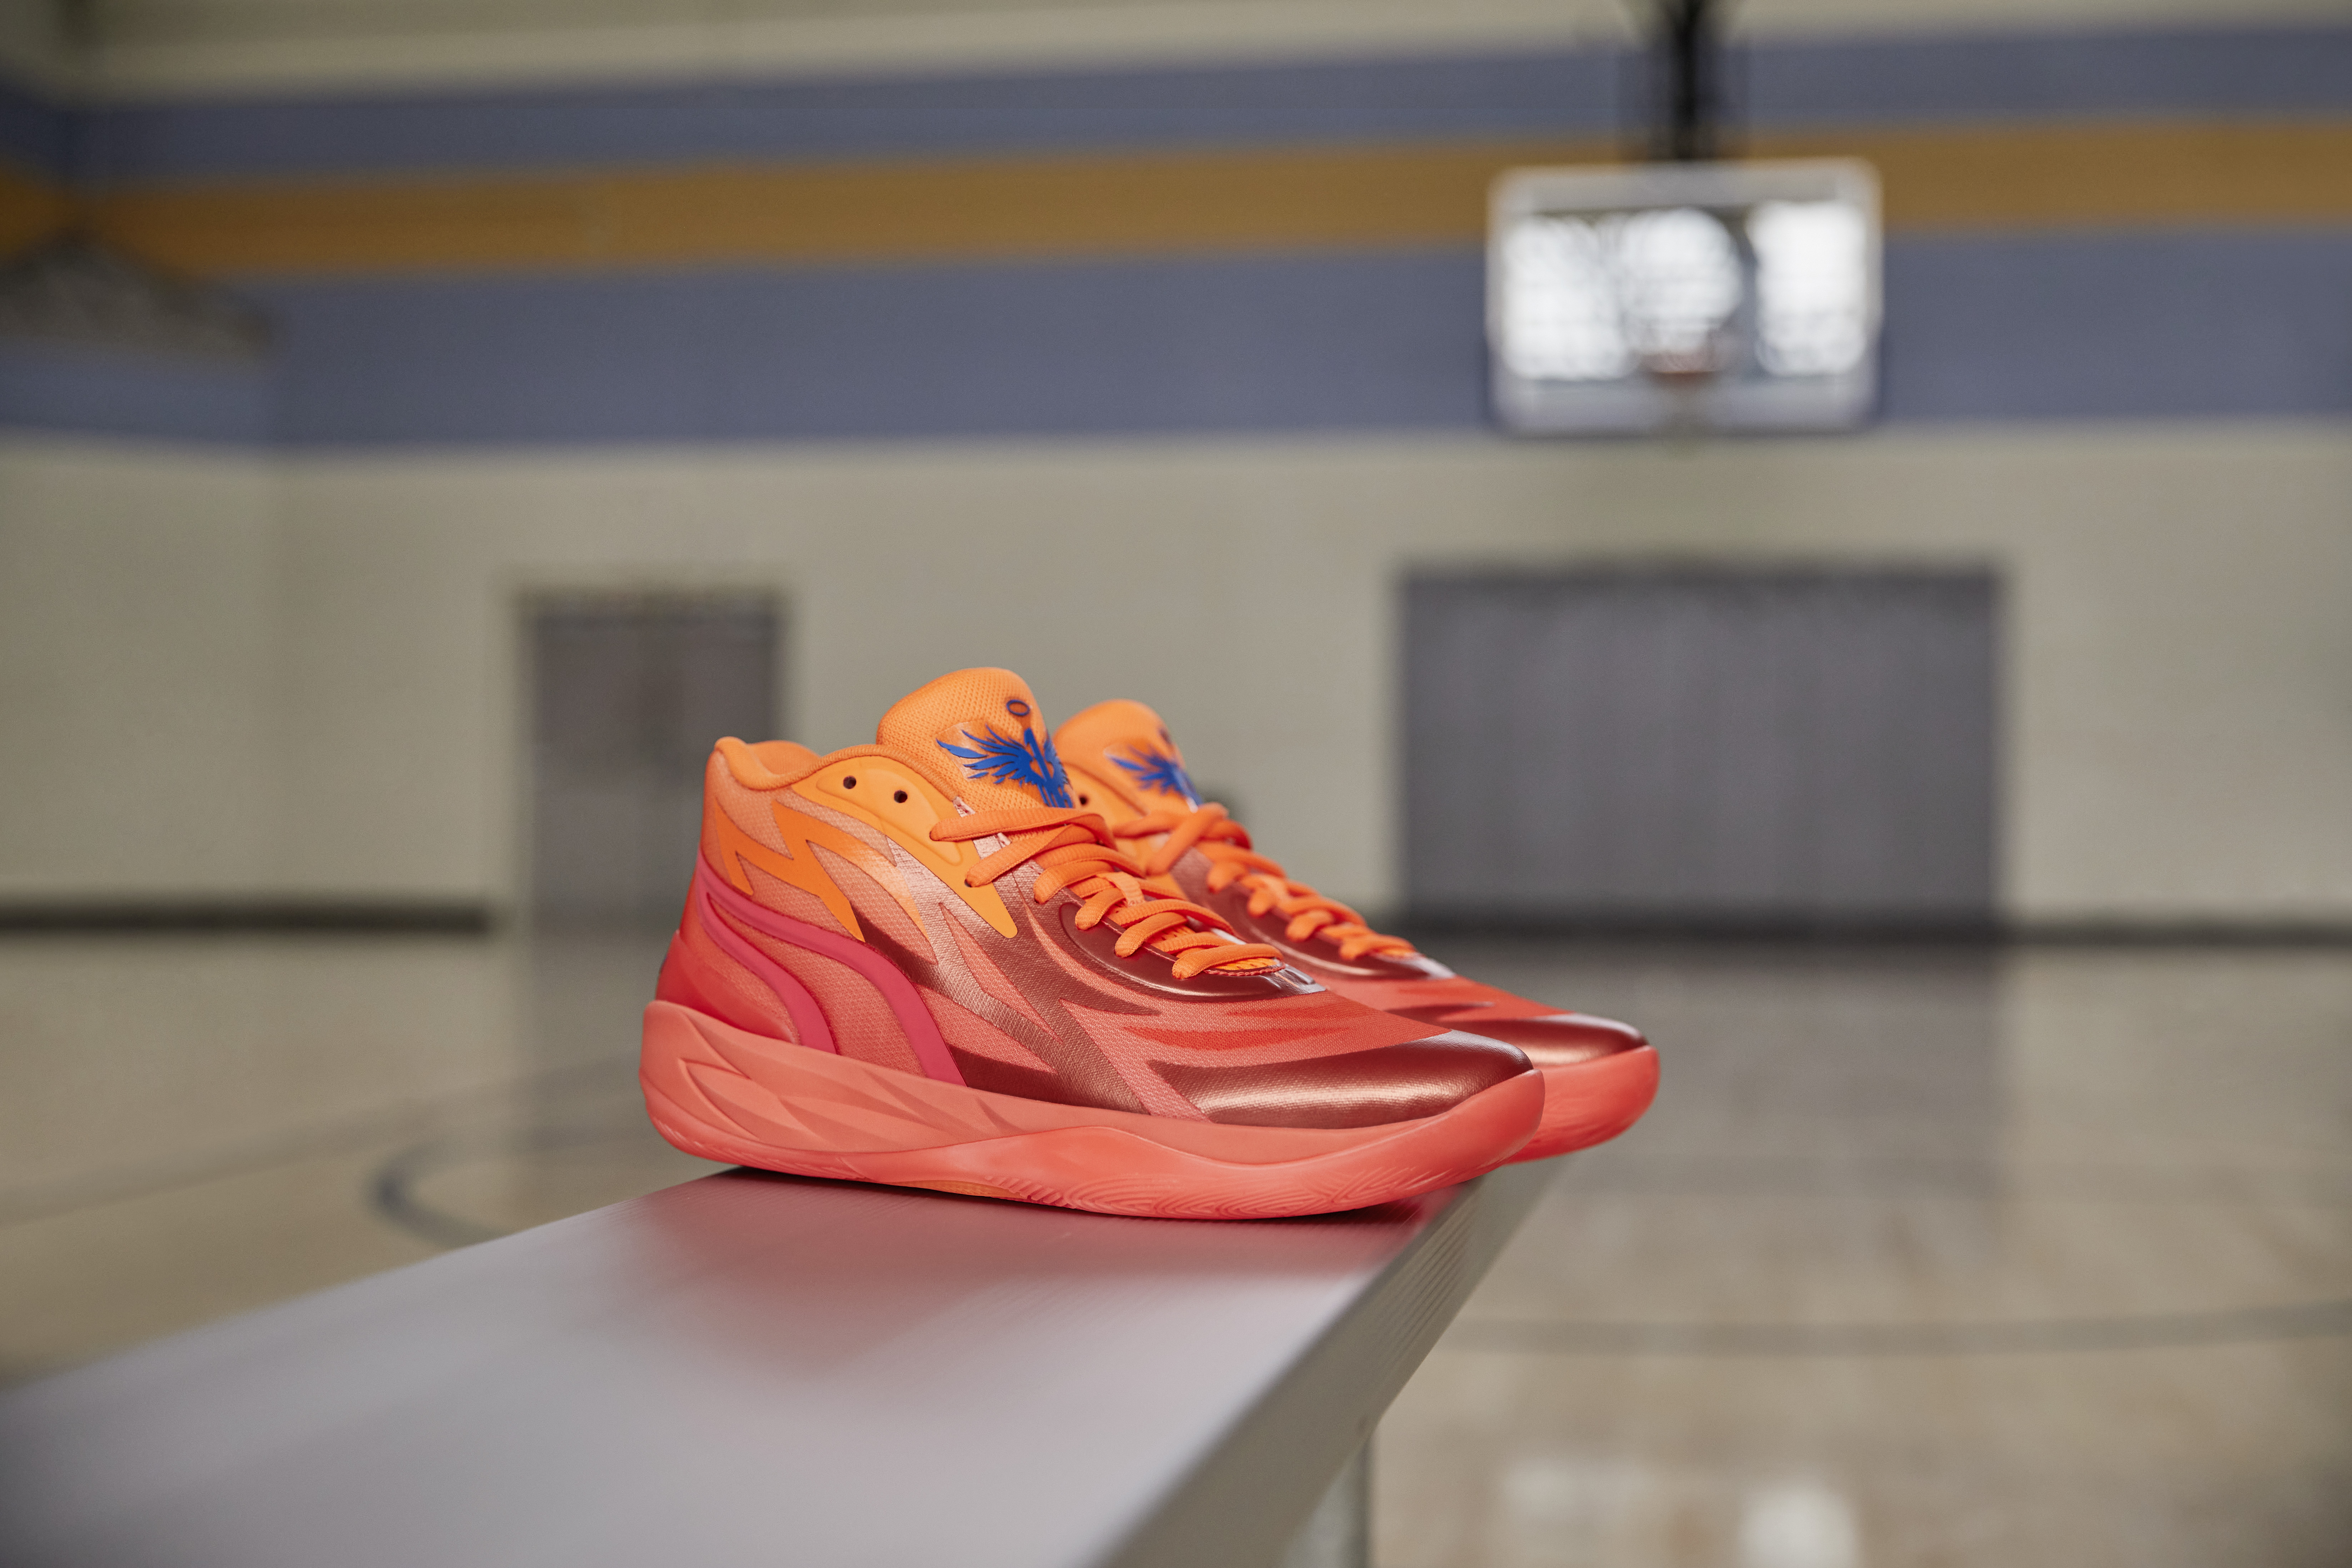 guisante Gruñido Jugar con PUMA and Foot Locker, Inc. Expand Partnership to Reach Next-Generation  Customers Through Basketball and Other Elevated Collaborations | Business  Wire